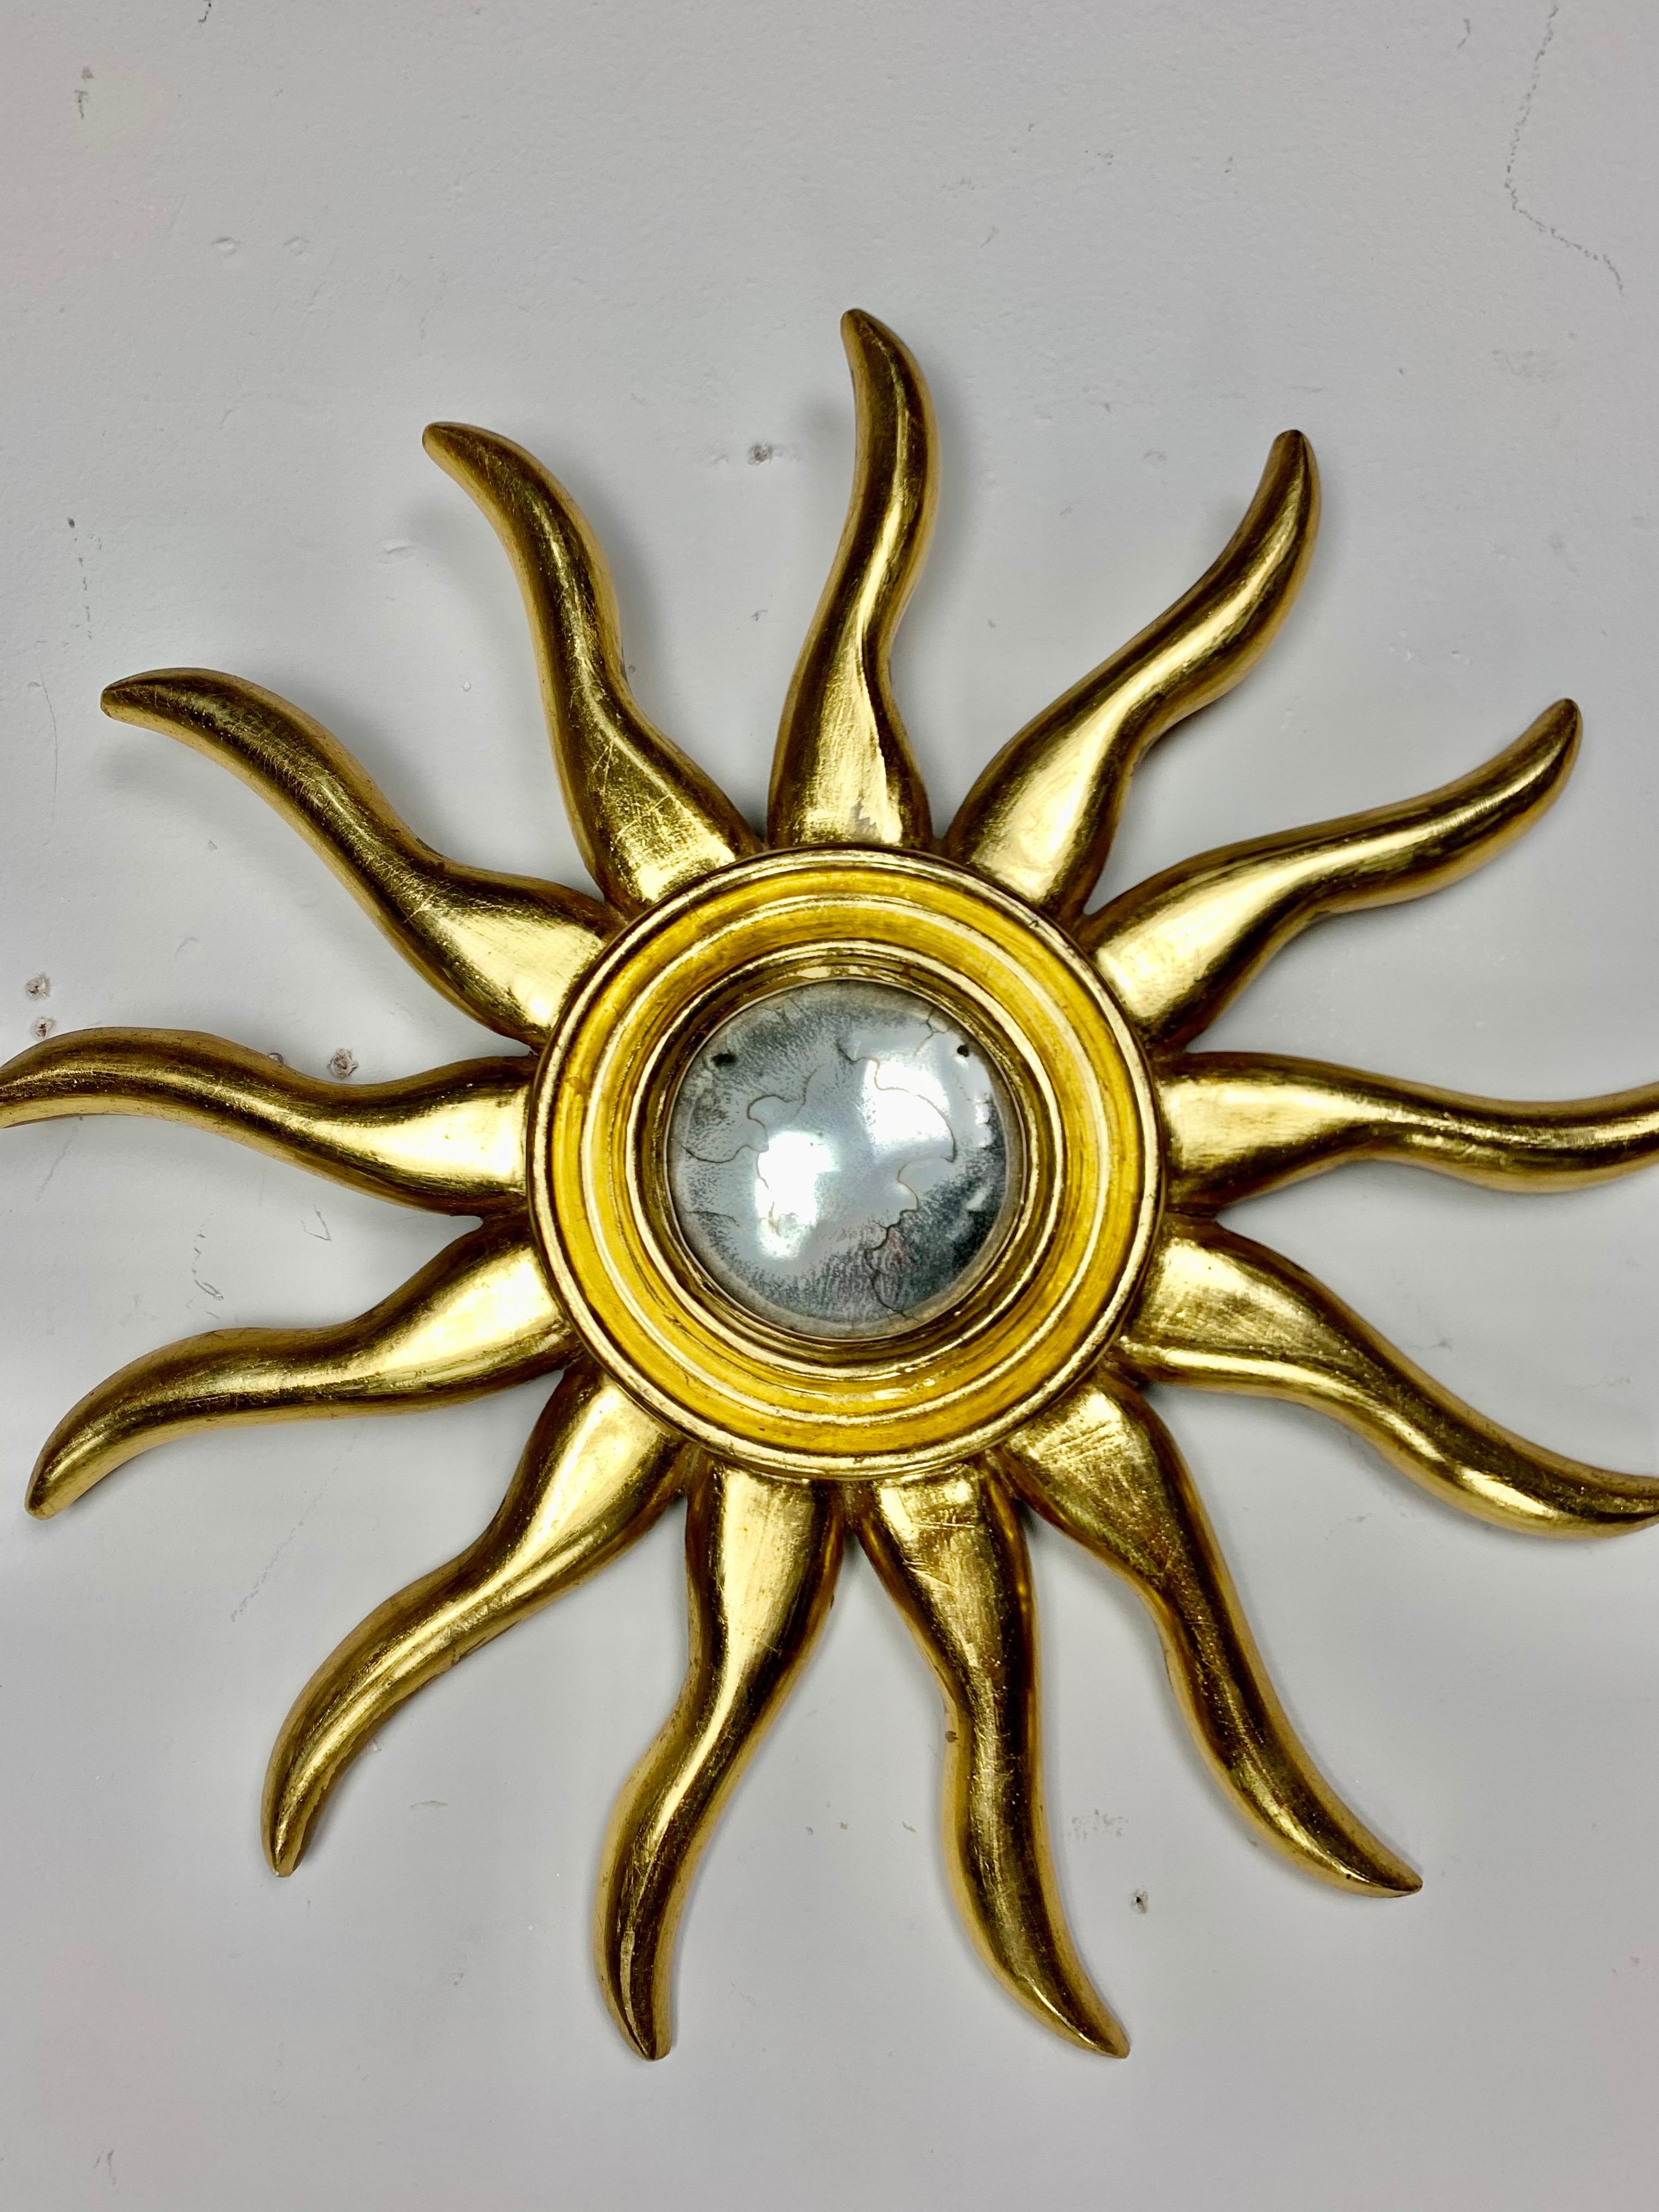 Pair of Italian carved giltwood sunburst mirrors. They are a great accent over windows and doorways or add a few more for a special wall covered with sunshine. I have my own wall and enjoy it everyday.